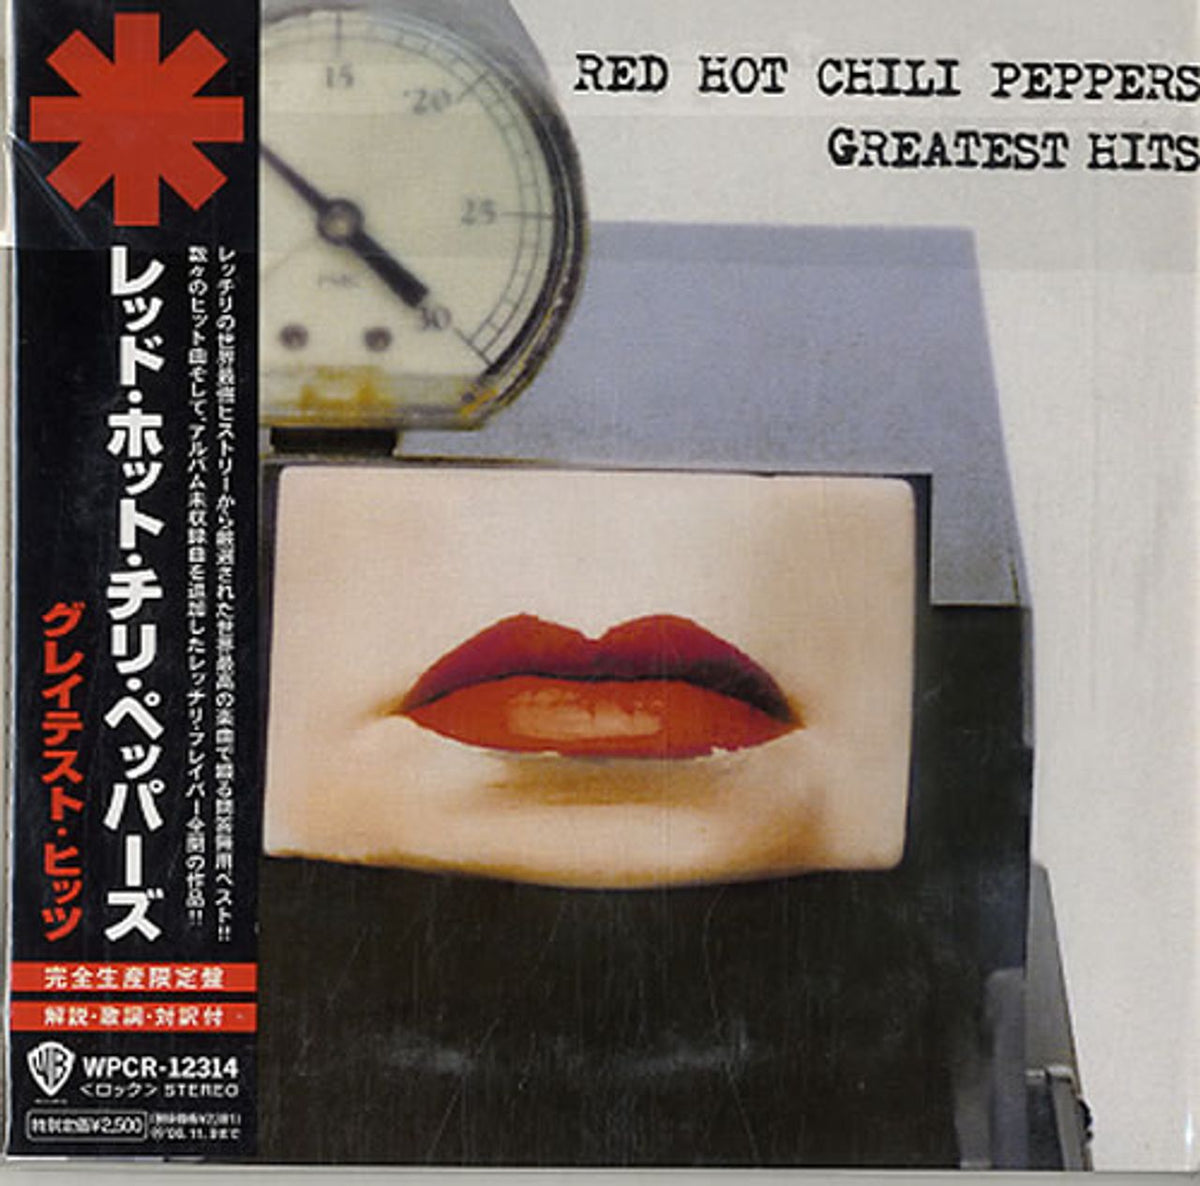 Red Hot Chili Peppers Greatest Hits Japanese CD album